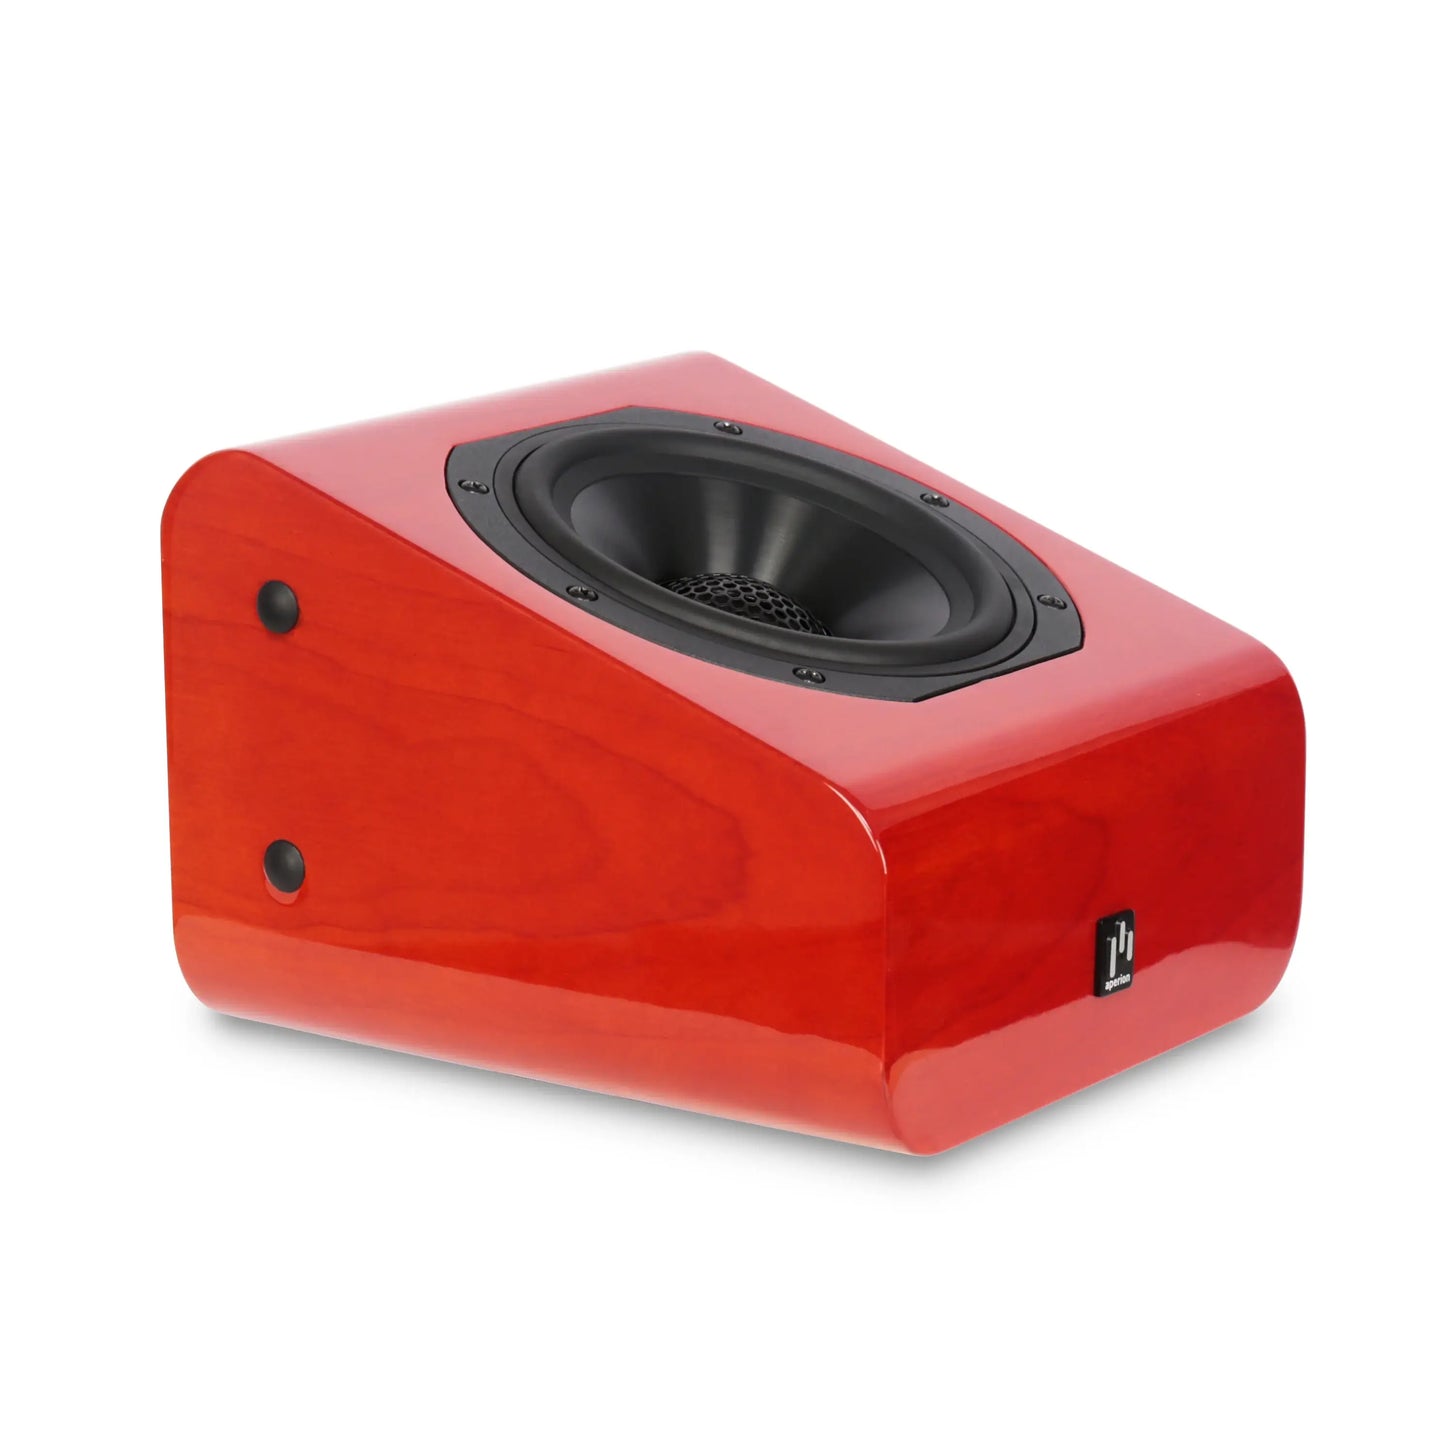 Aperion-A5-Atmos-5.25"-Immersive-Reflective/Height-Module-Speaker-GlossCherry-Side-Front-aperionaudio